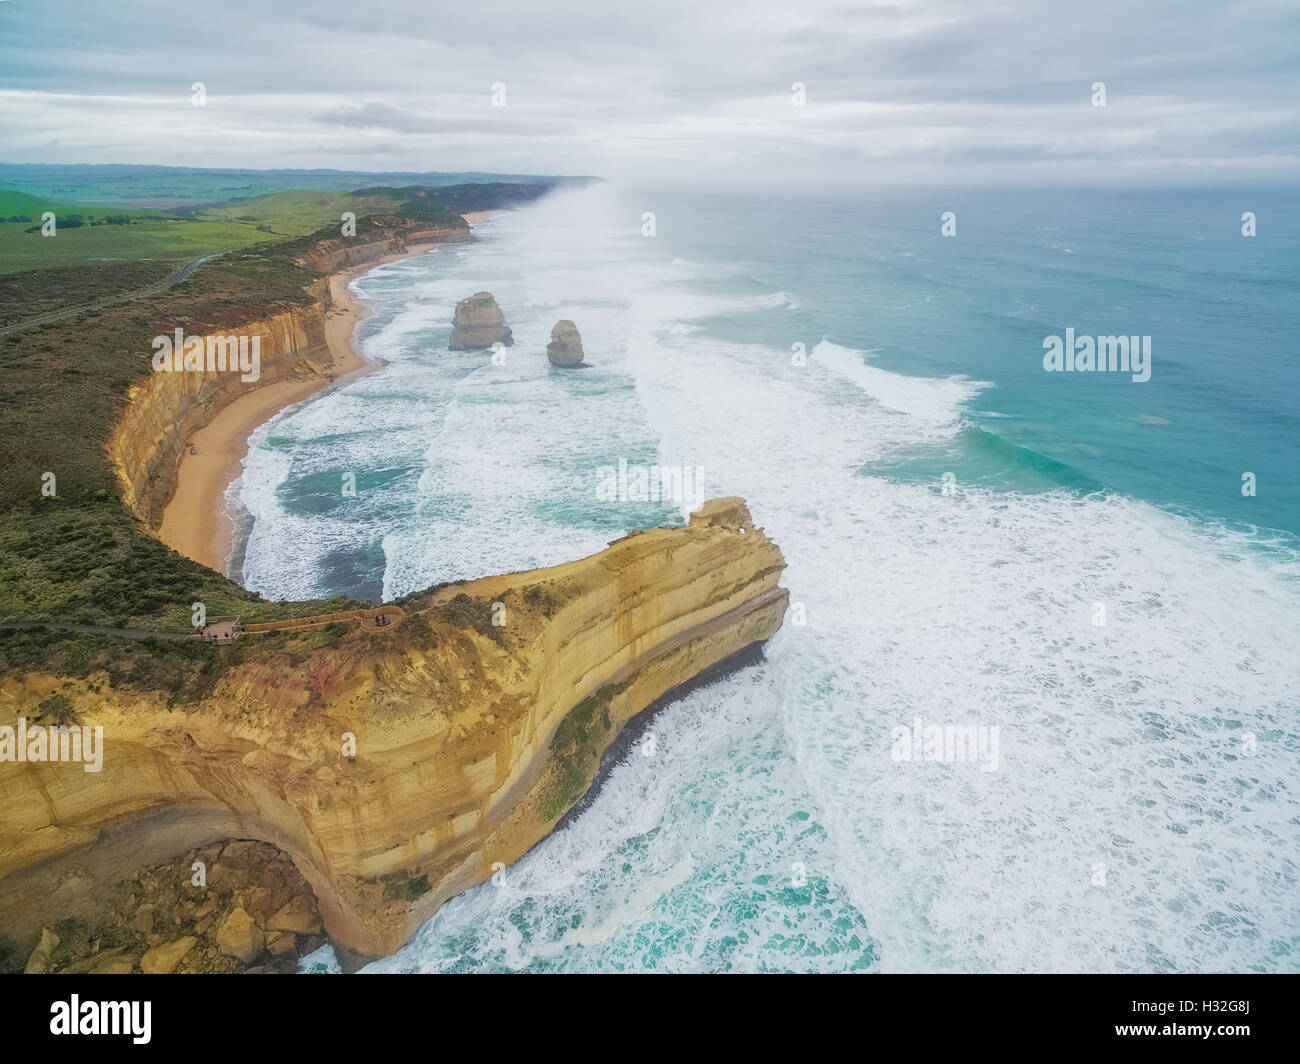 Aerial view of the Gog and Magog rock formations and the Lookouts at the Great Ocean Road, Australia Stock Photo